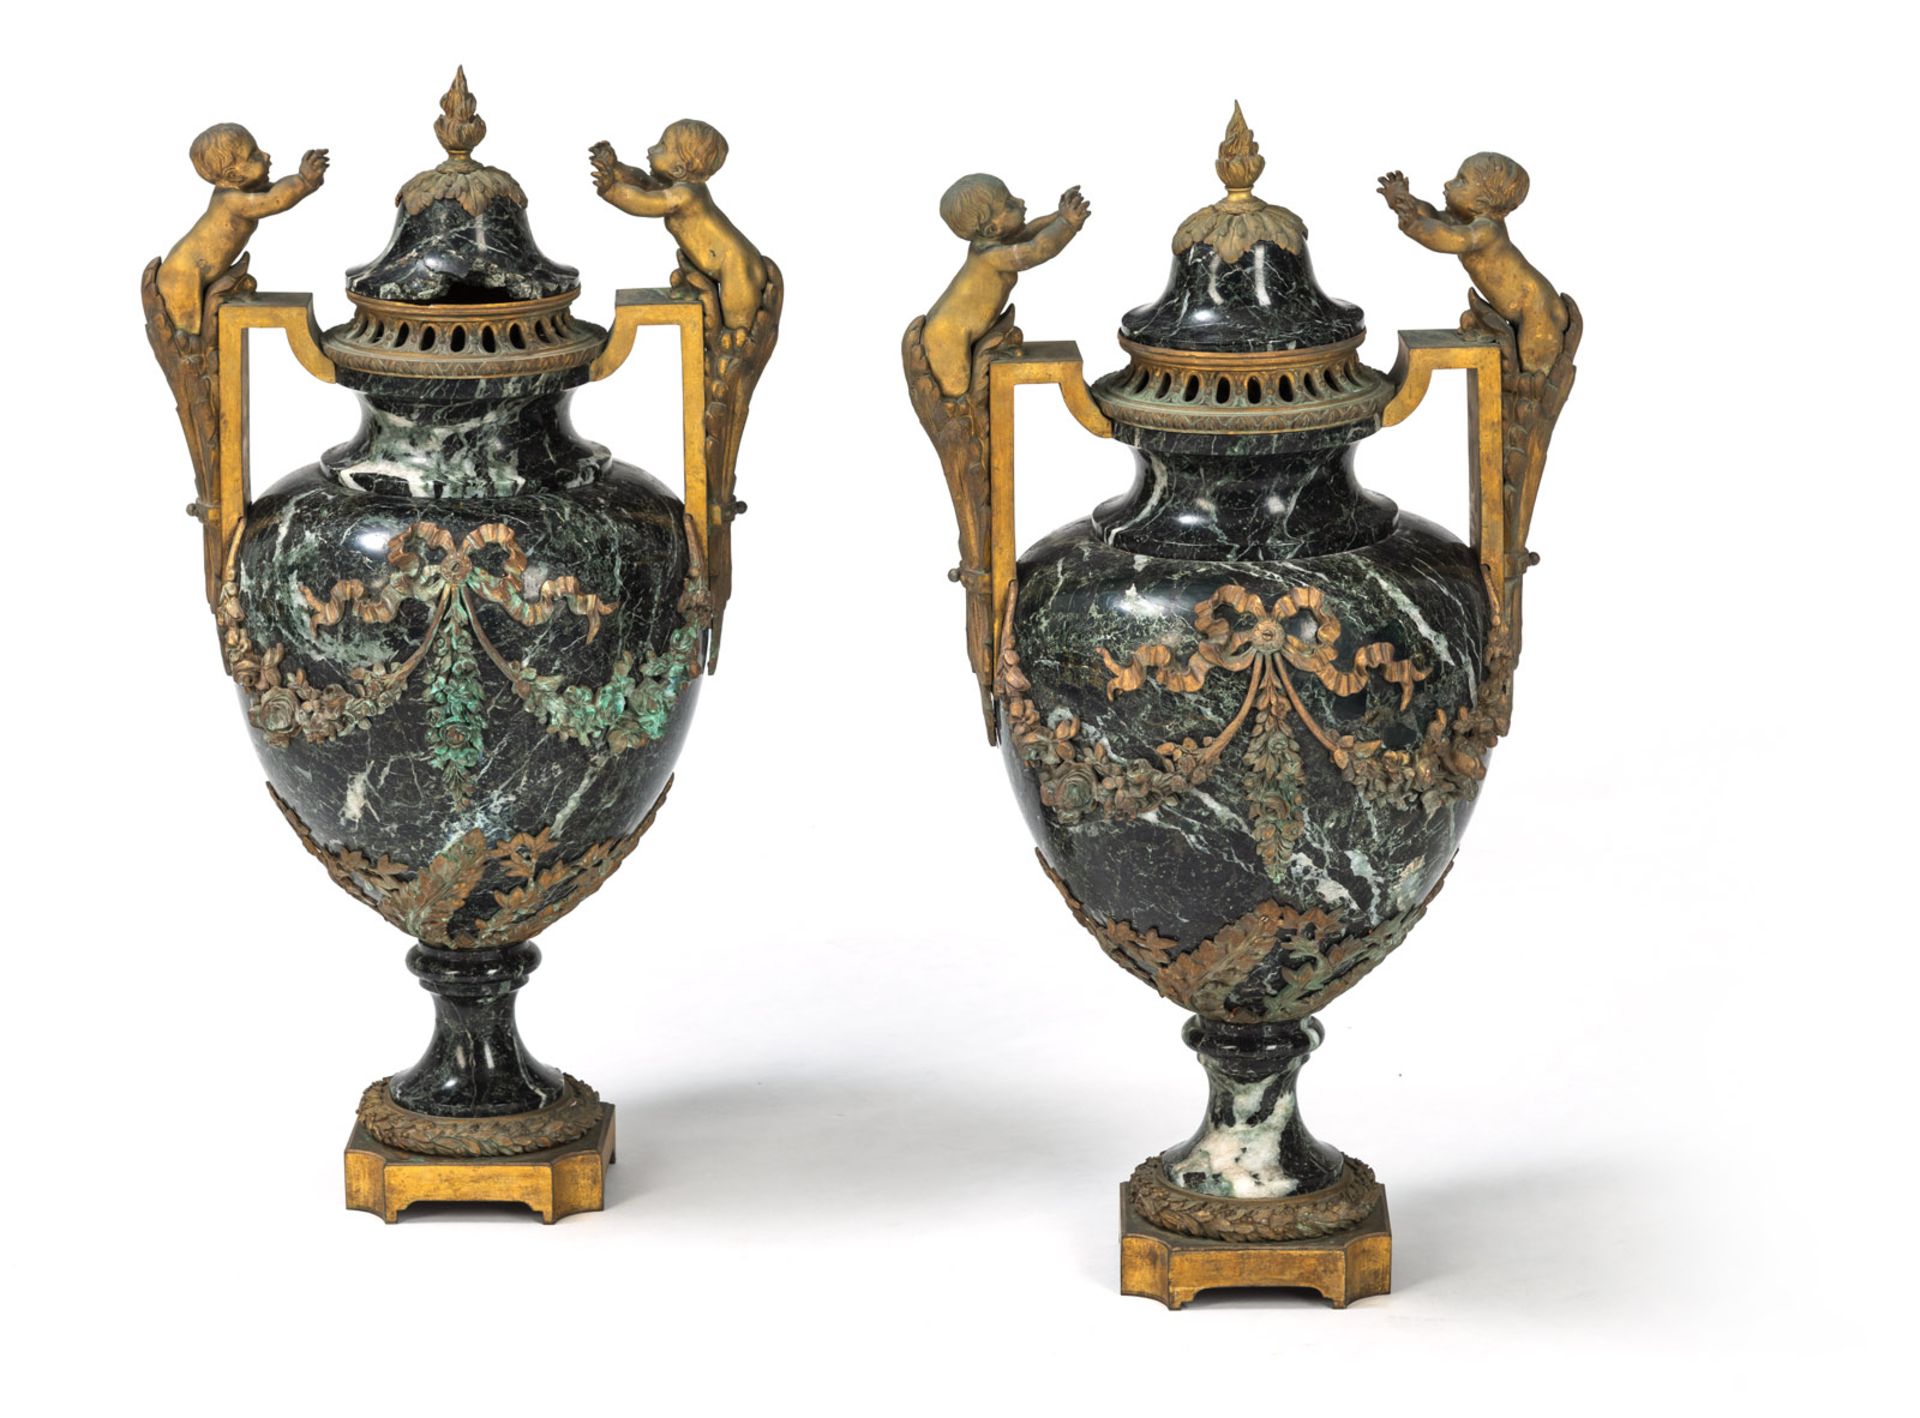 A PAIR OF FRENCH ORMOLU MOUNTED VERT DE MER MARBLE TWO-HANDLED VASES - Image 2 of 4